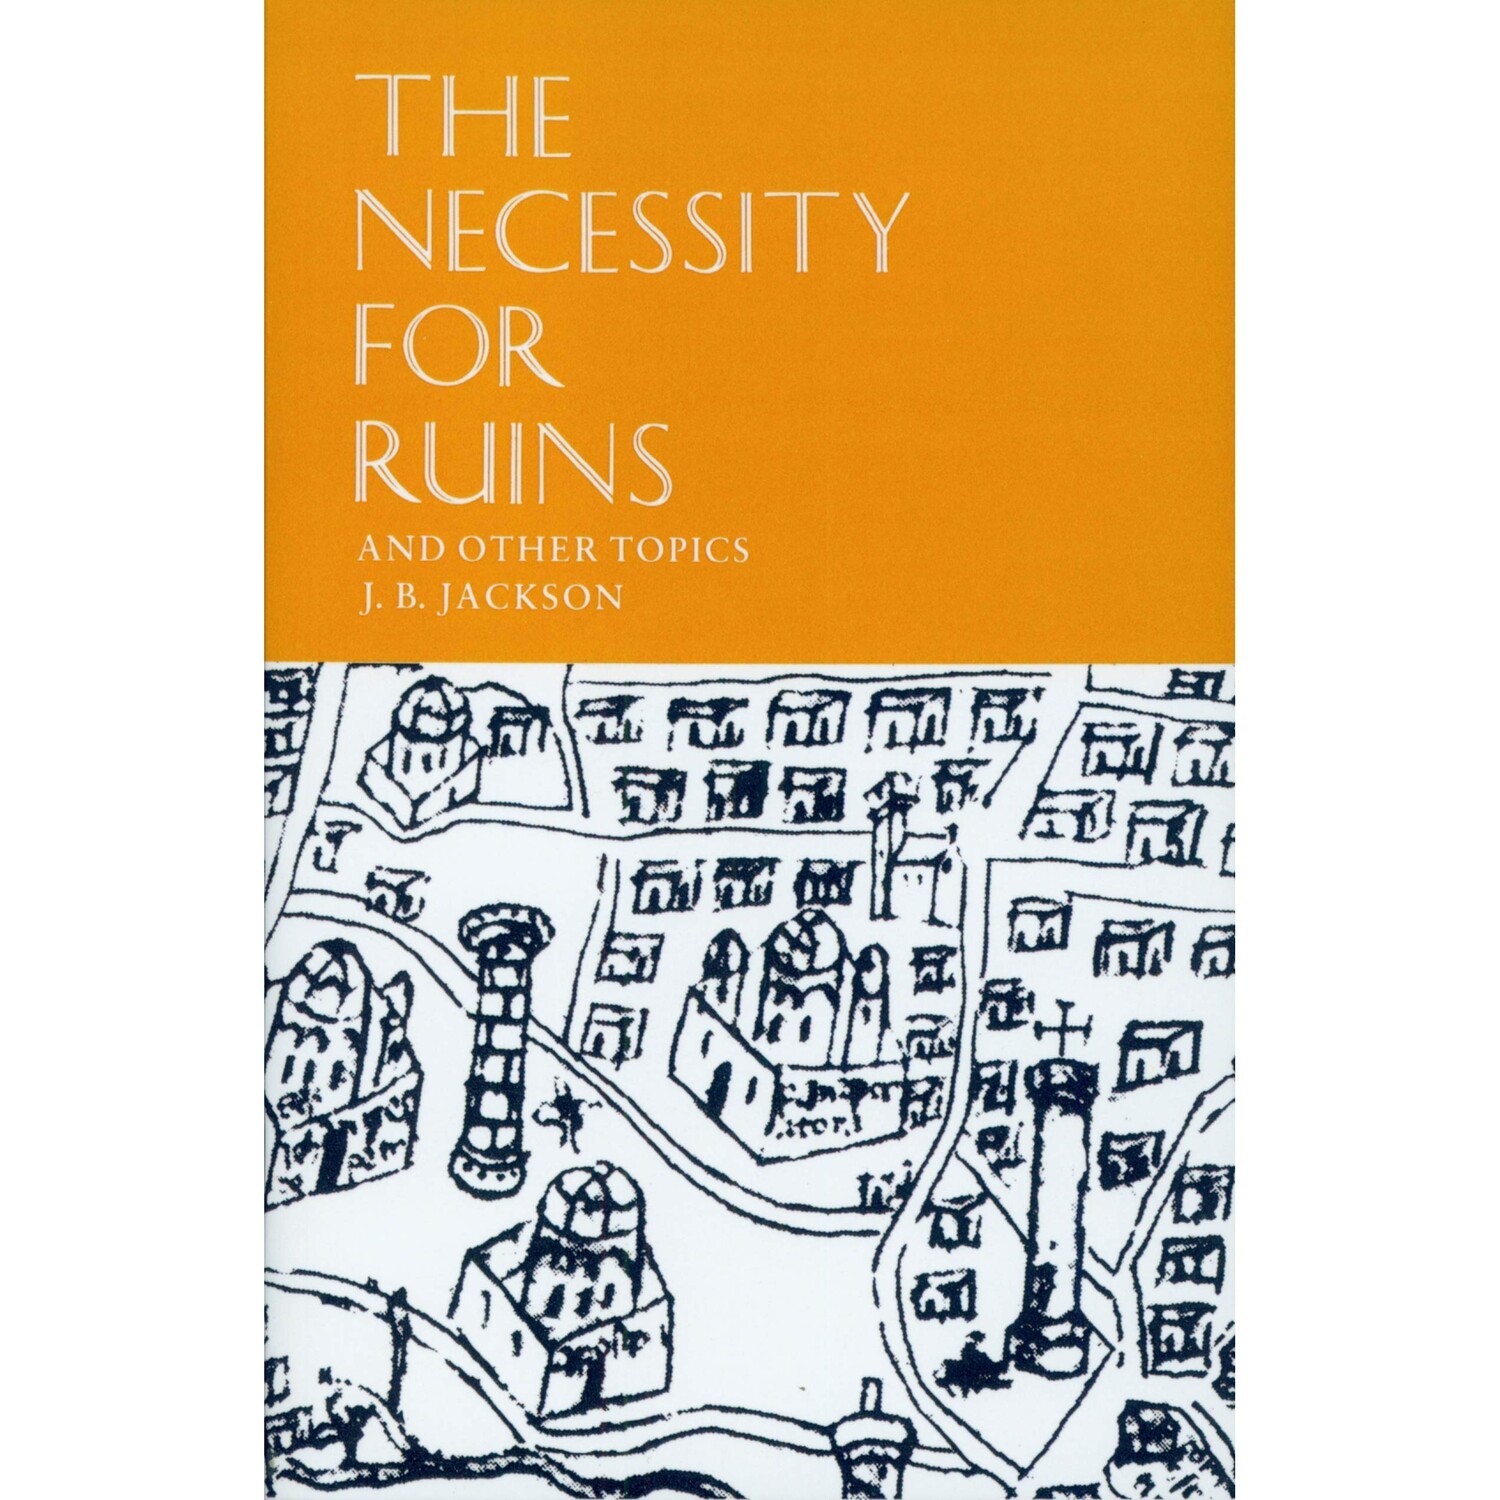 "The Necessity for Ruins" by J. B. Jackson